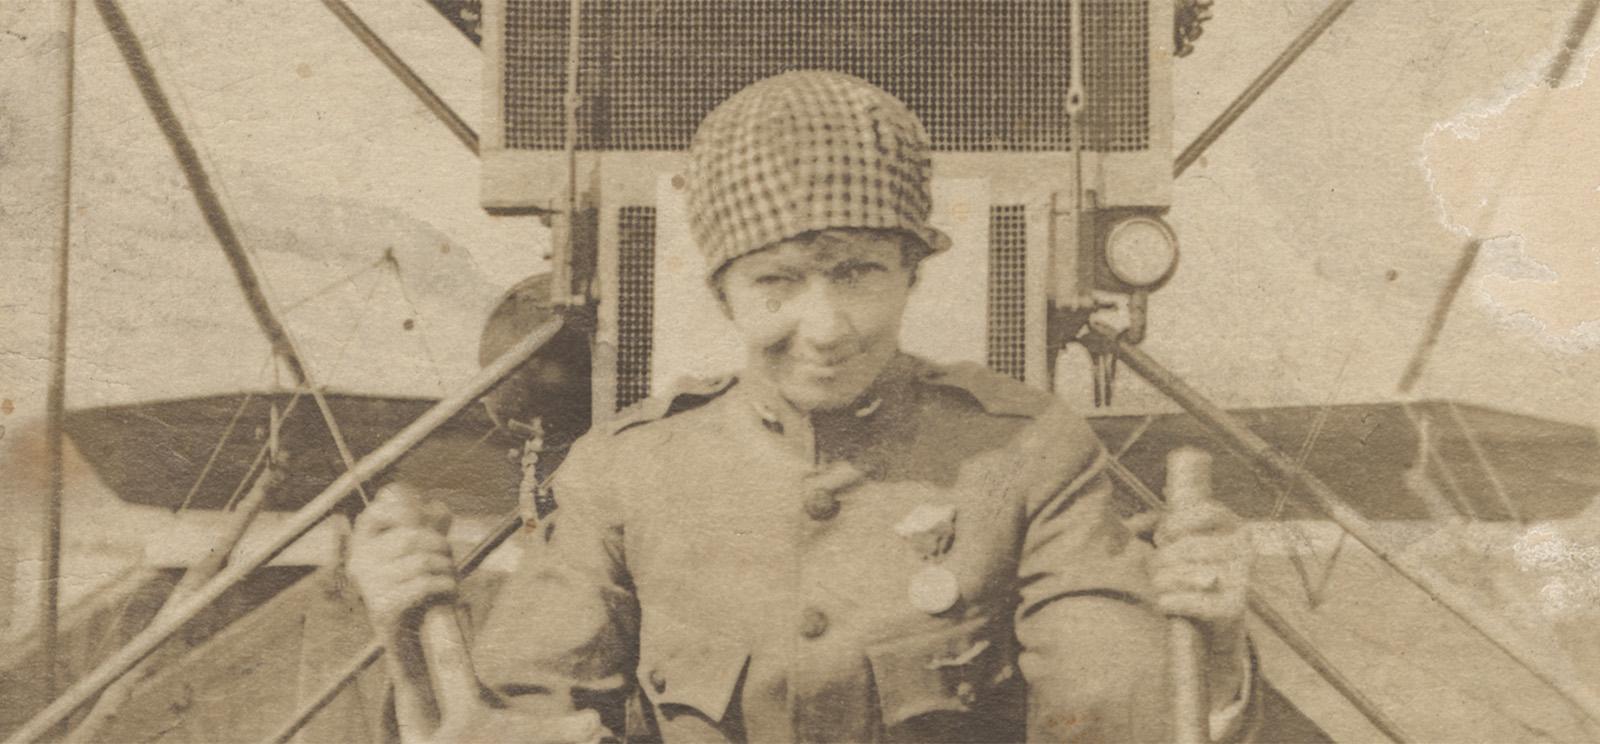 Sepia photograph of a white woman in an aviation uniform sitting in the cockpit of an WWI-era airplane